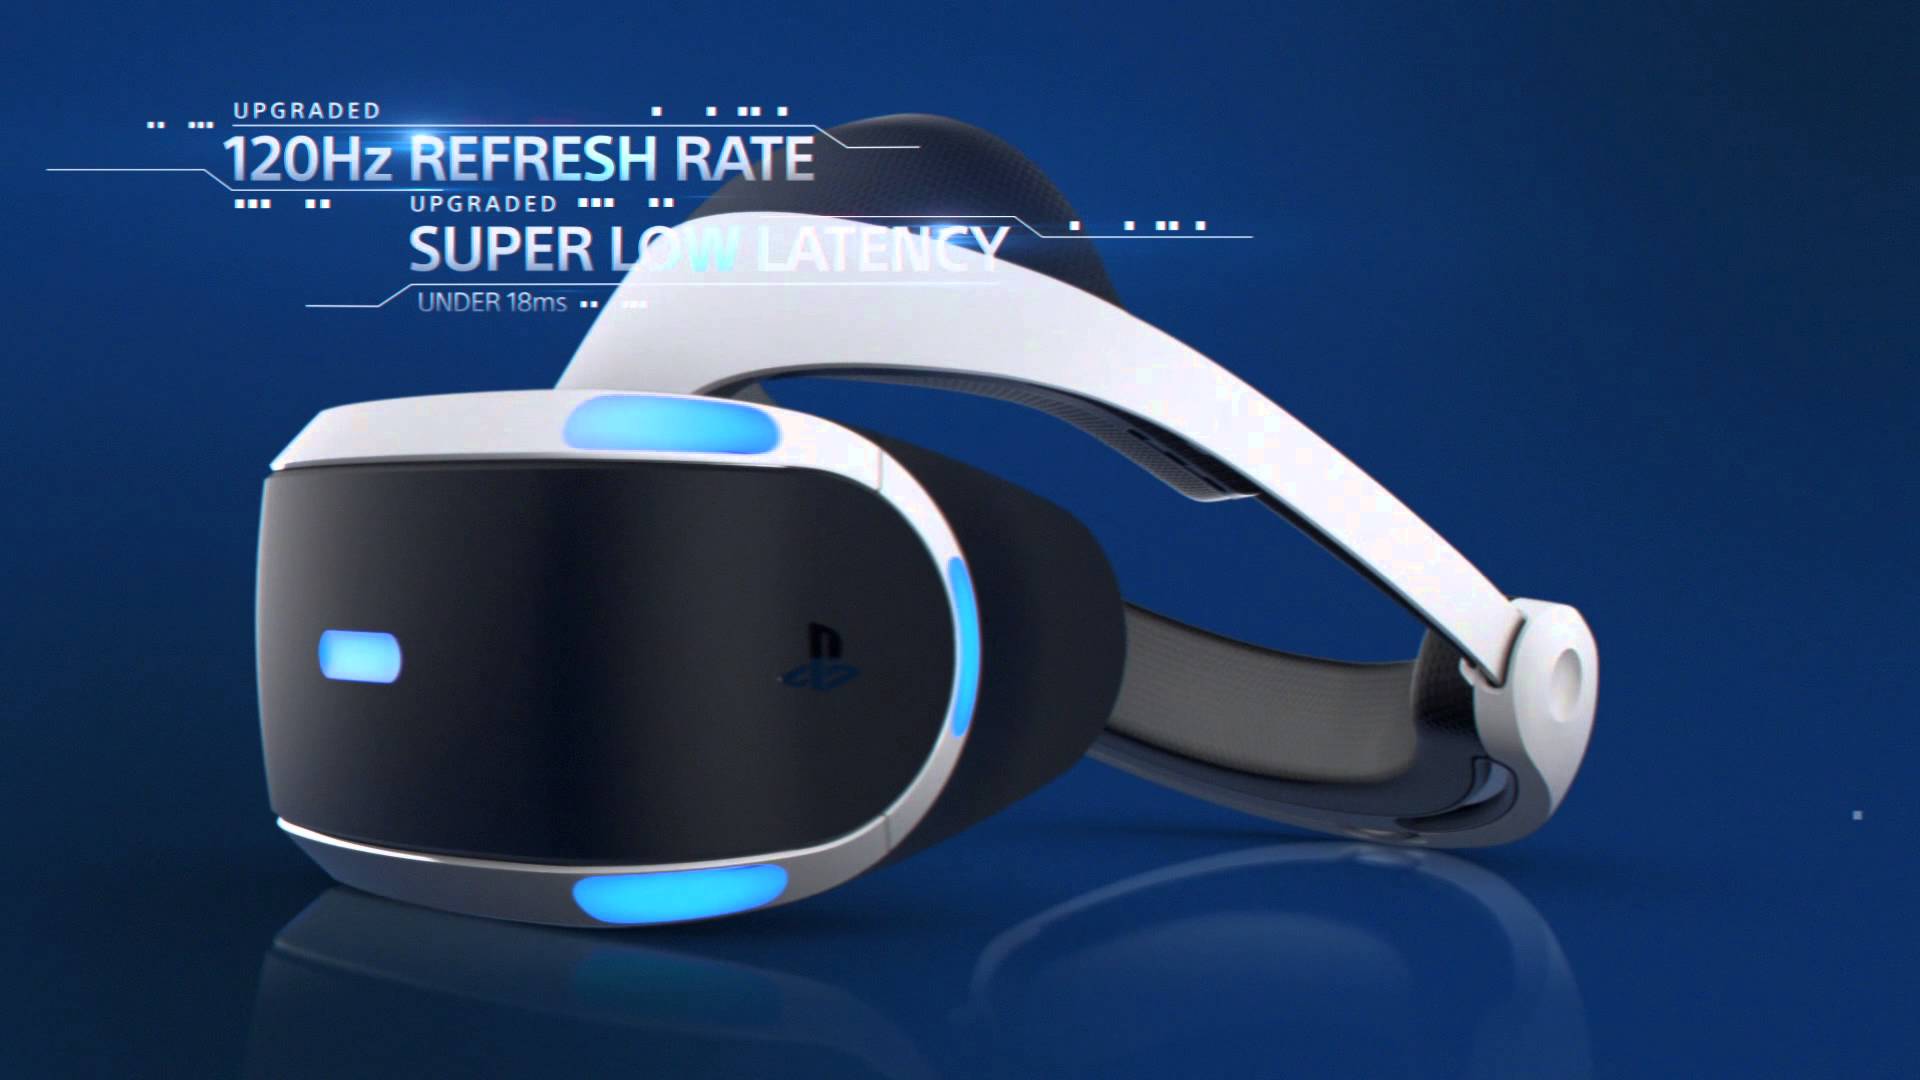 New Sony Project Morpheus Video Highlights New Specs, Features and Design – to VR